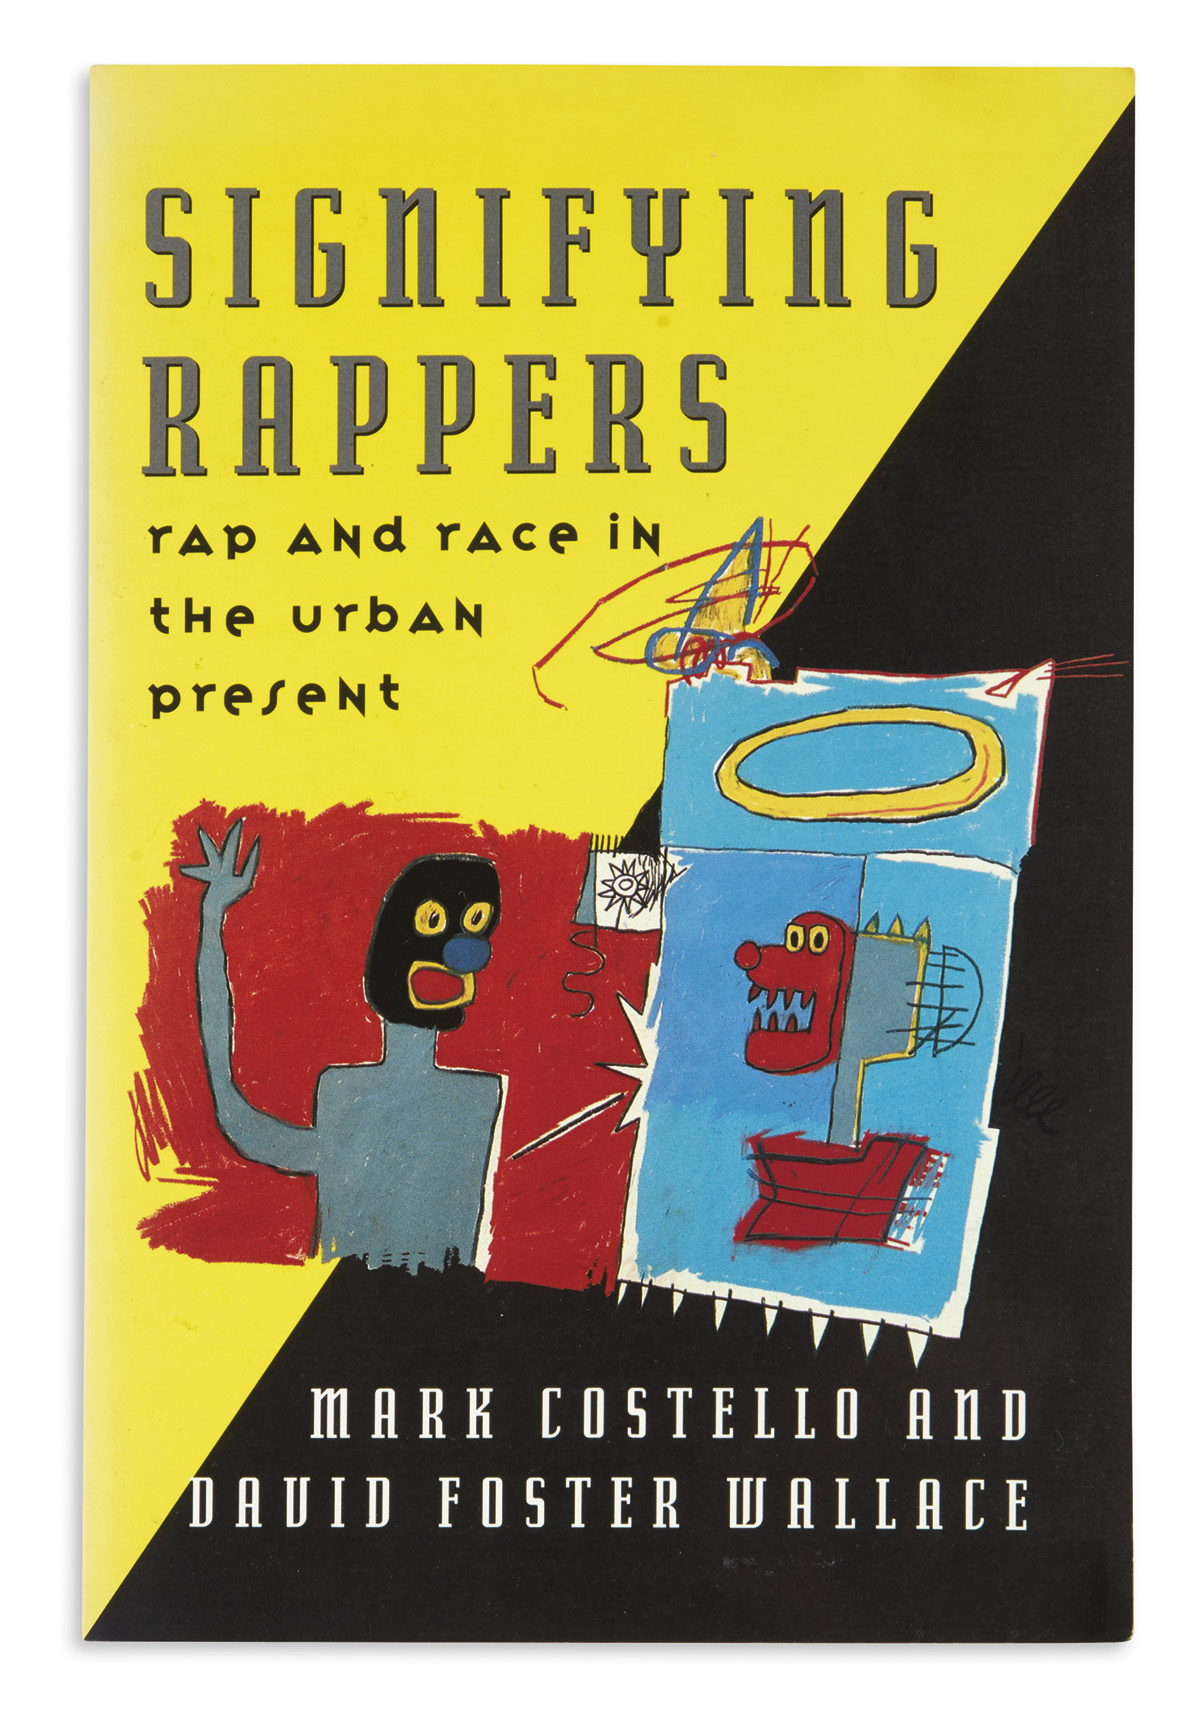 WALLACE, DAVID FOSTER and COSTELLO, MARK. Signifying Rappers: Rap and Race in the Urban Present.